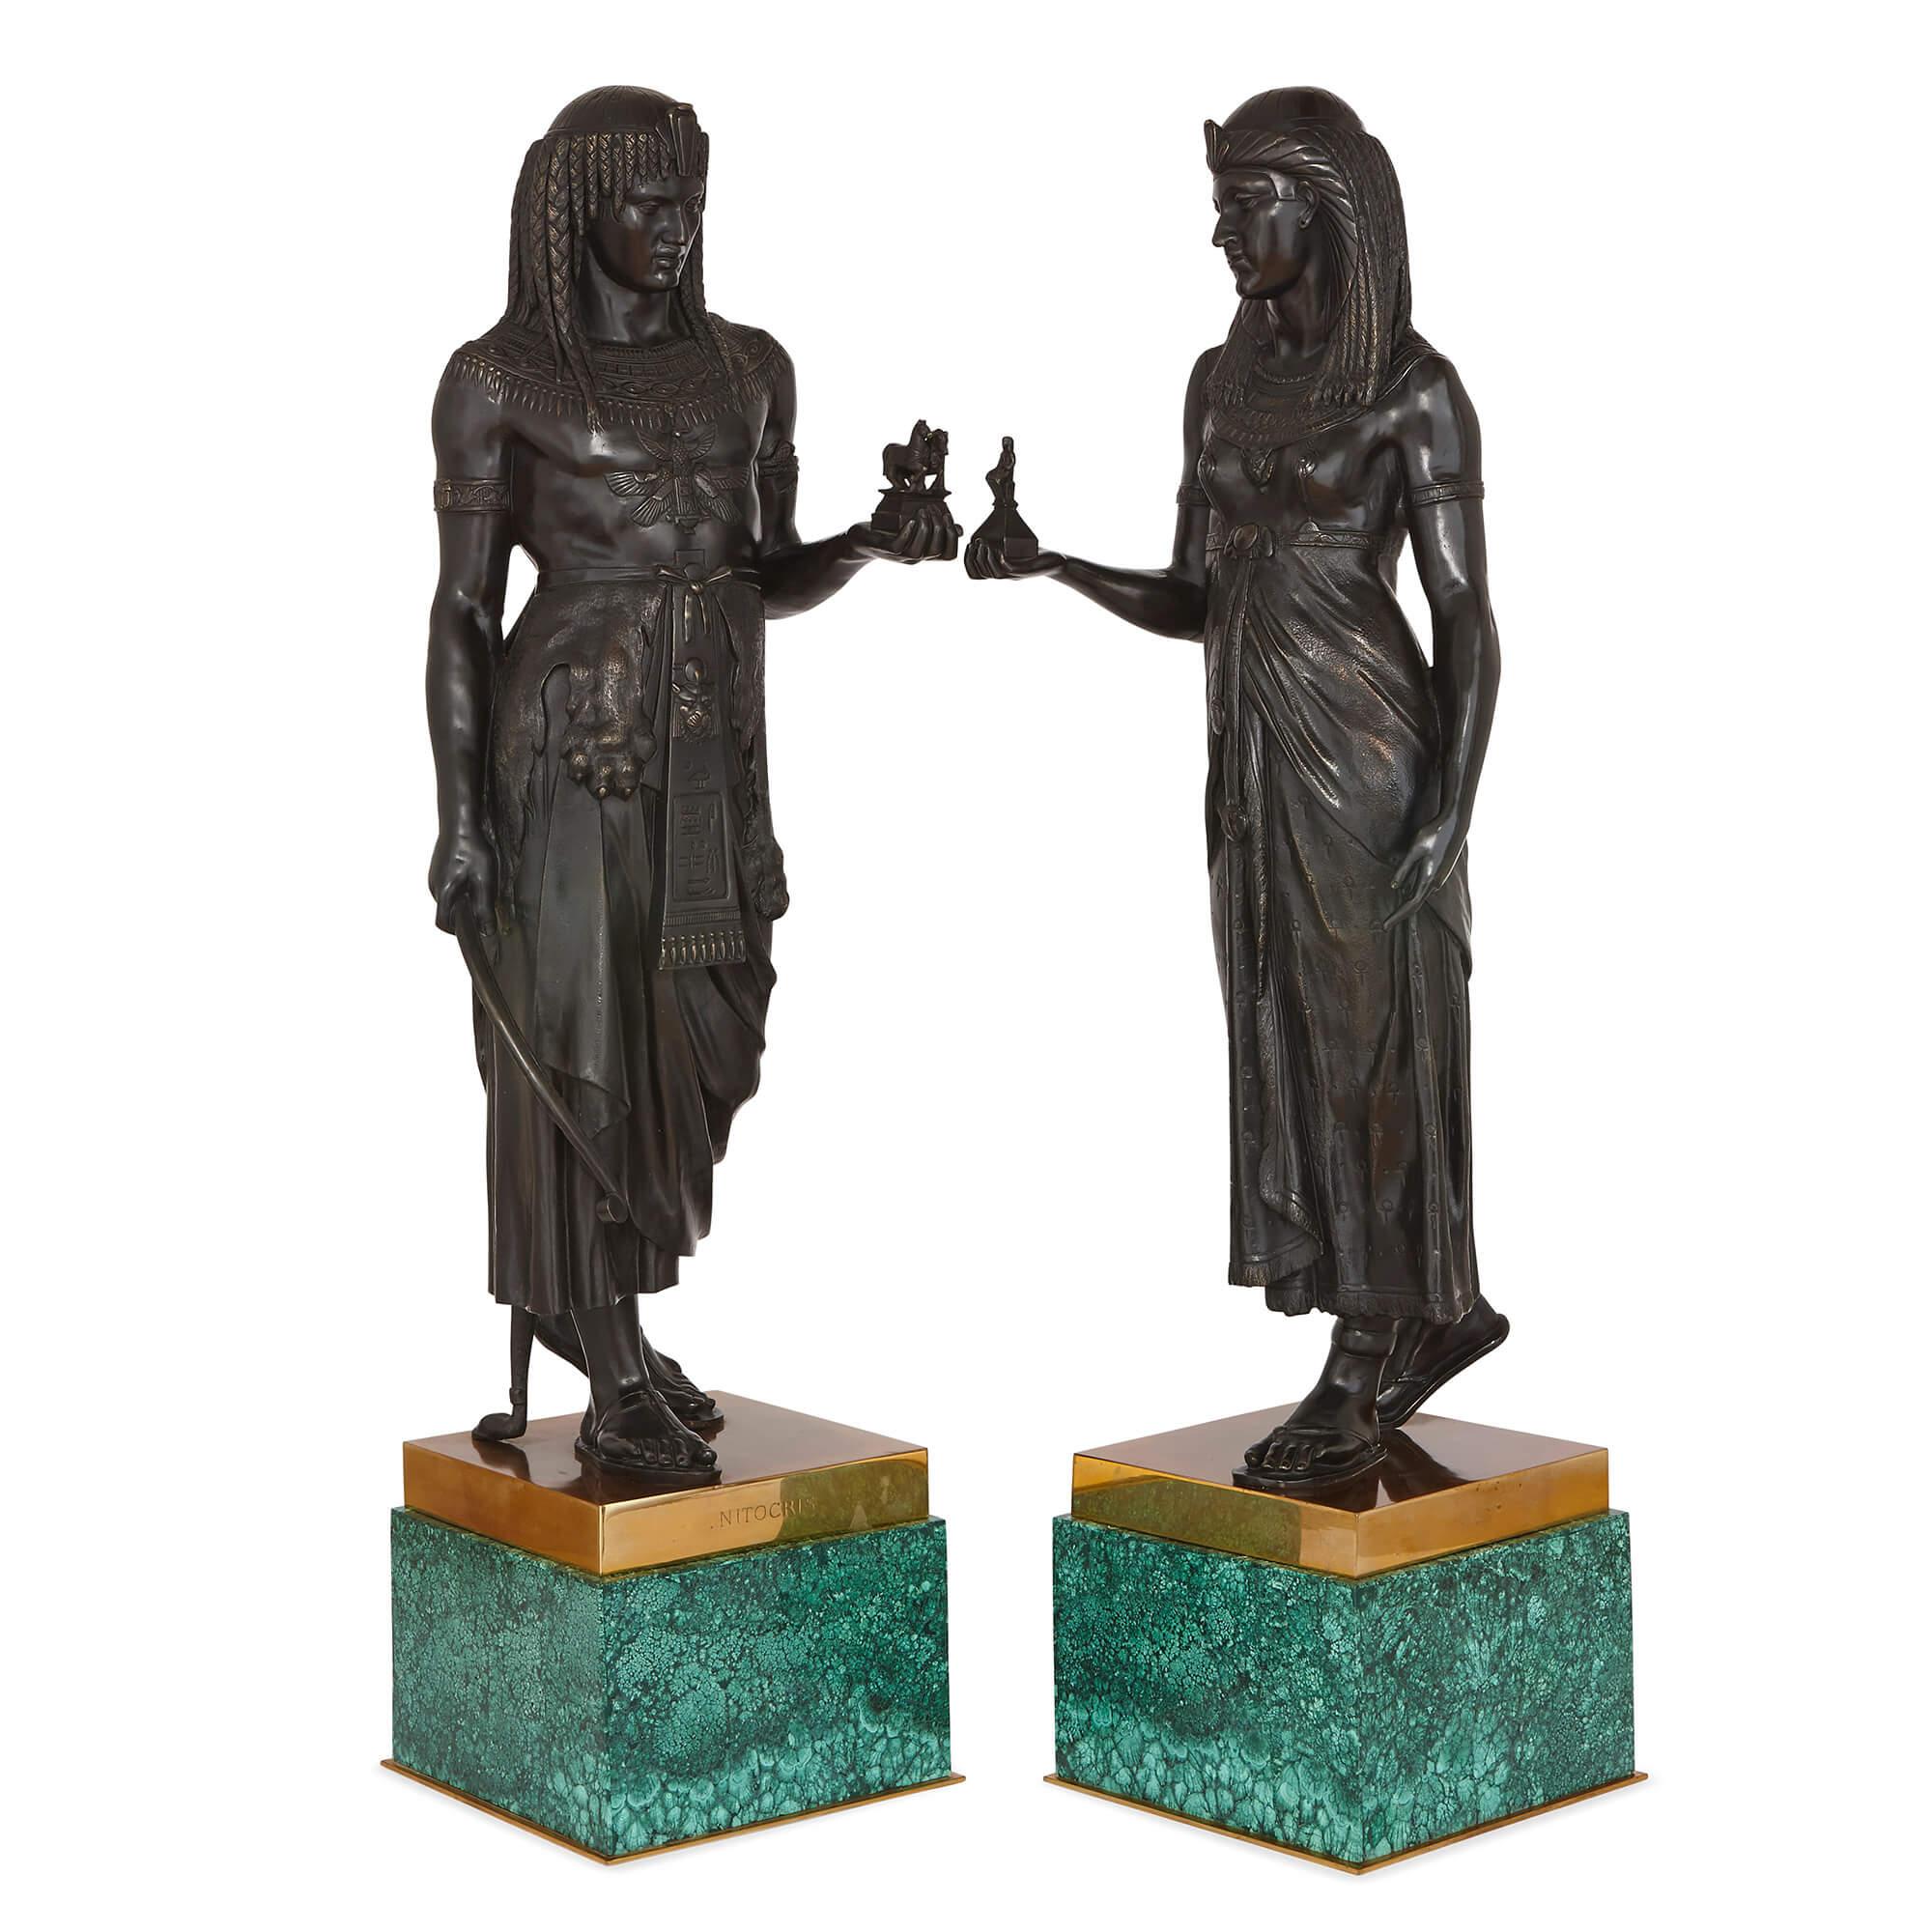 The pair of figures, one male and one female, are cast in patinated bronze, and are styled as Egyptian figures in the Empire style of Napoleon I. The sculptures are set upon square-form gilt bronze plinths, themselves mounted onto striking green